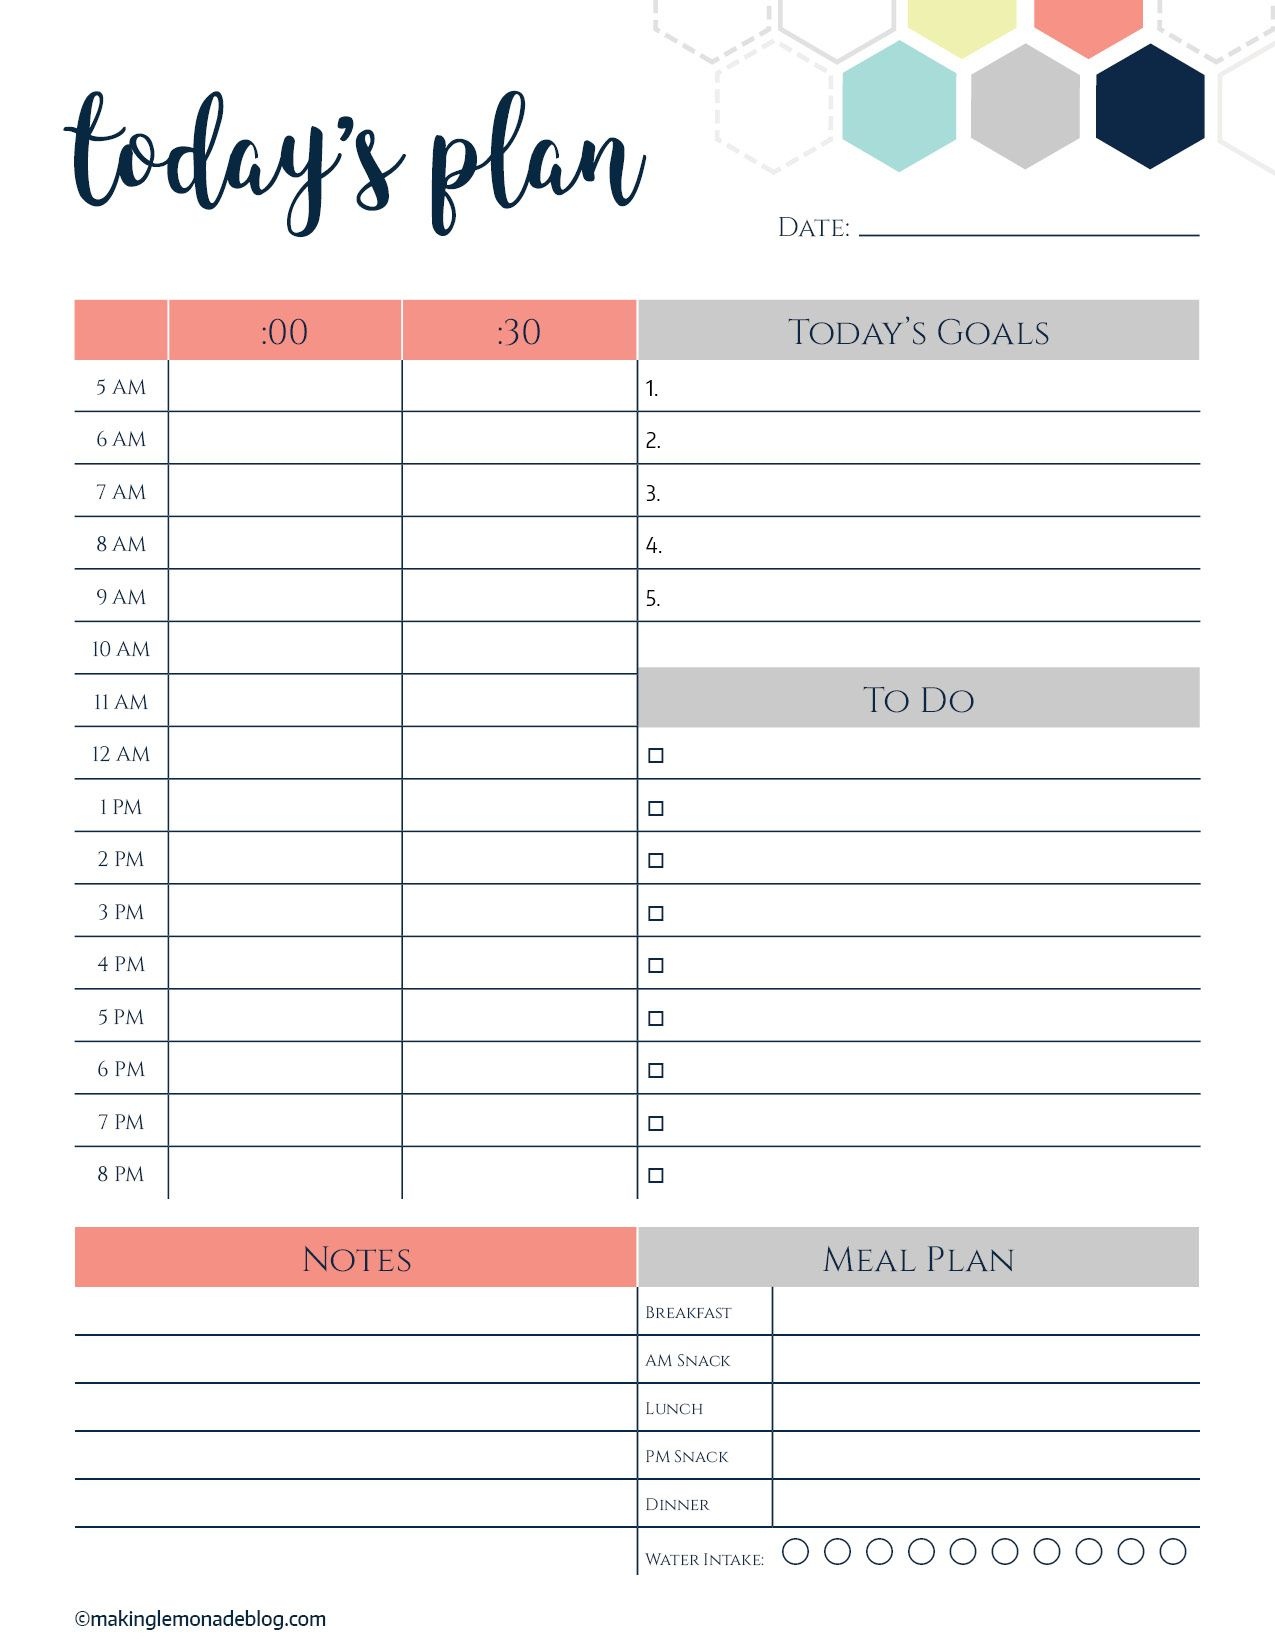 This Free Printable Daily Planner Changes Everything. Finally A Way - Free Printable Daily Schedule